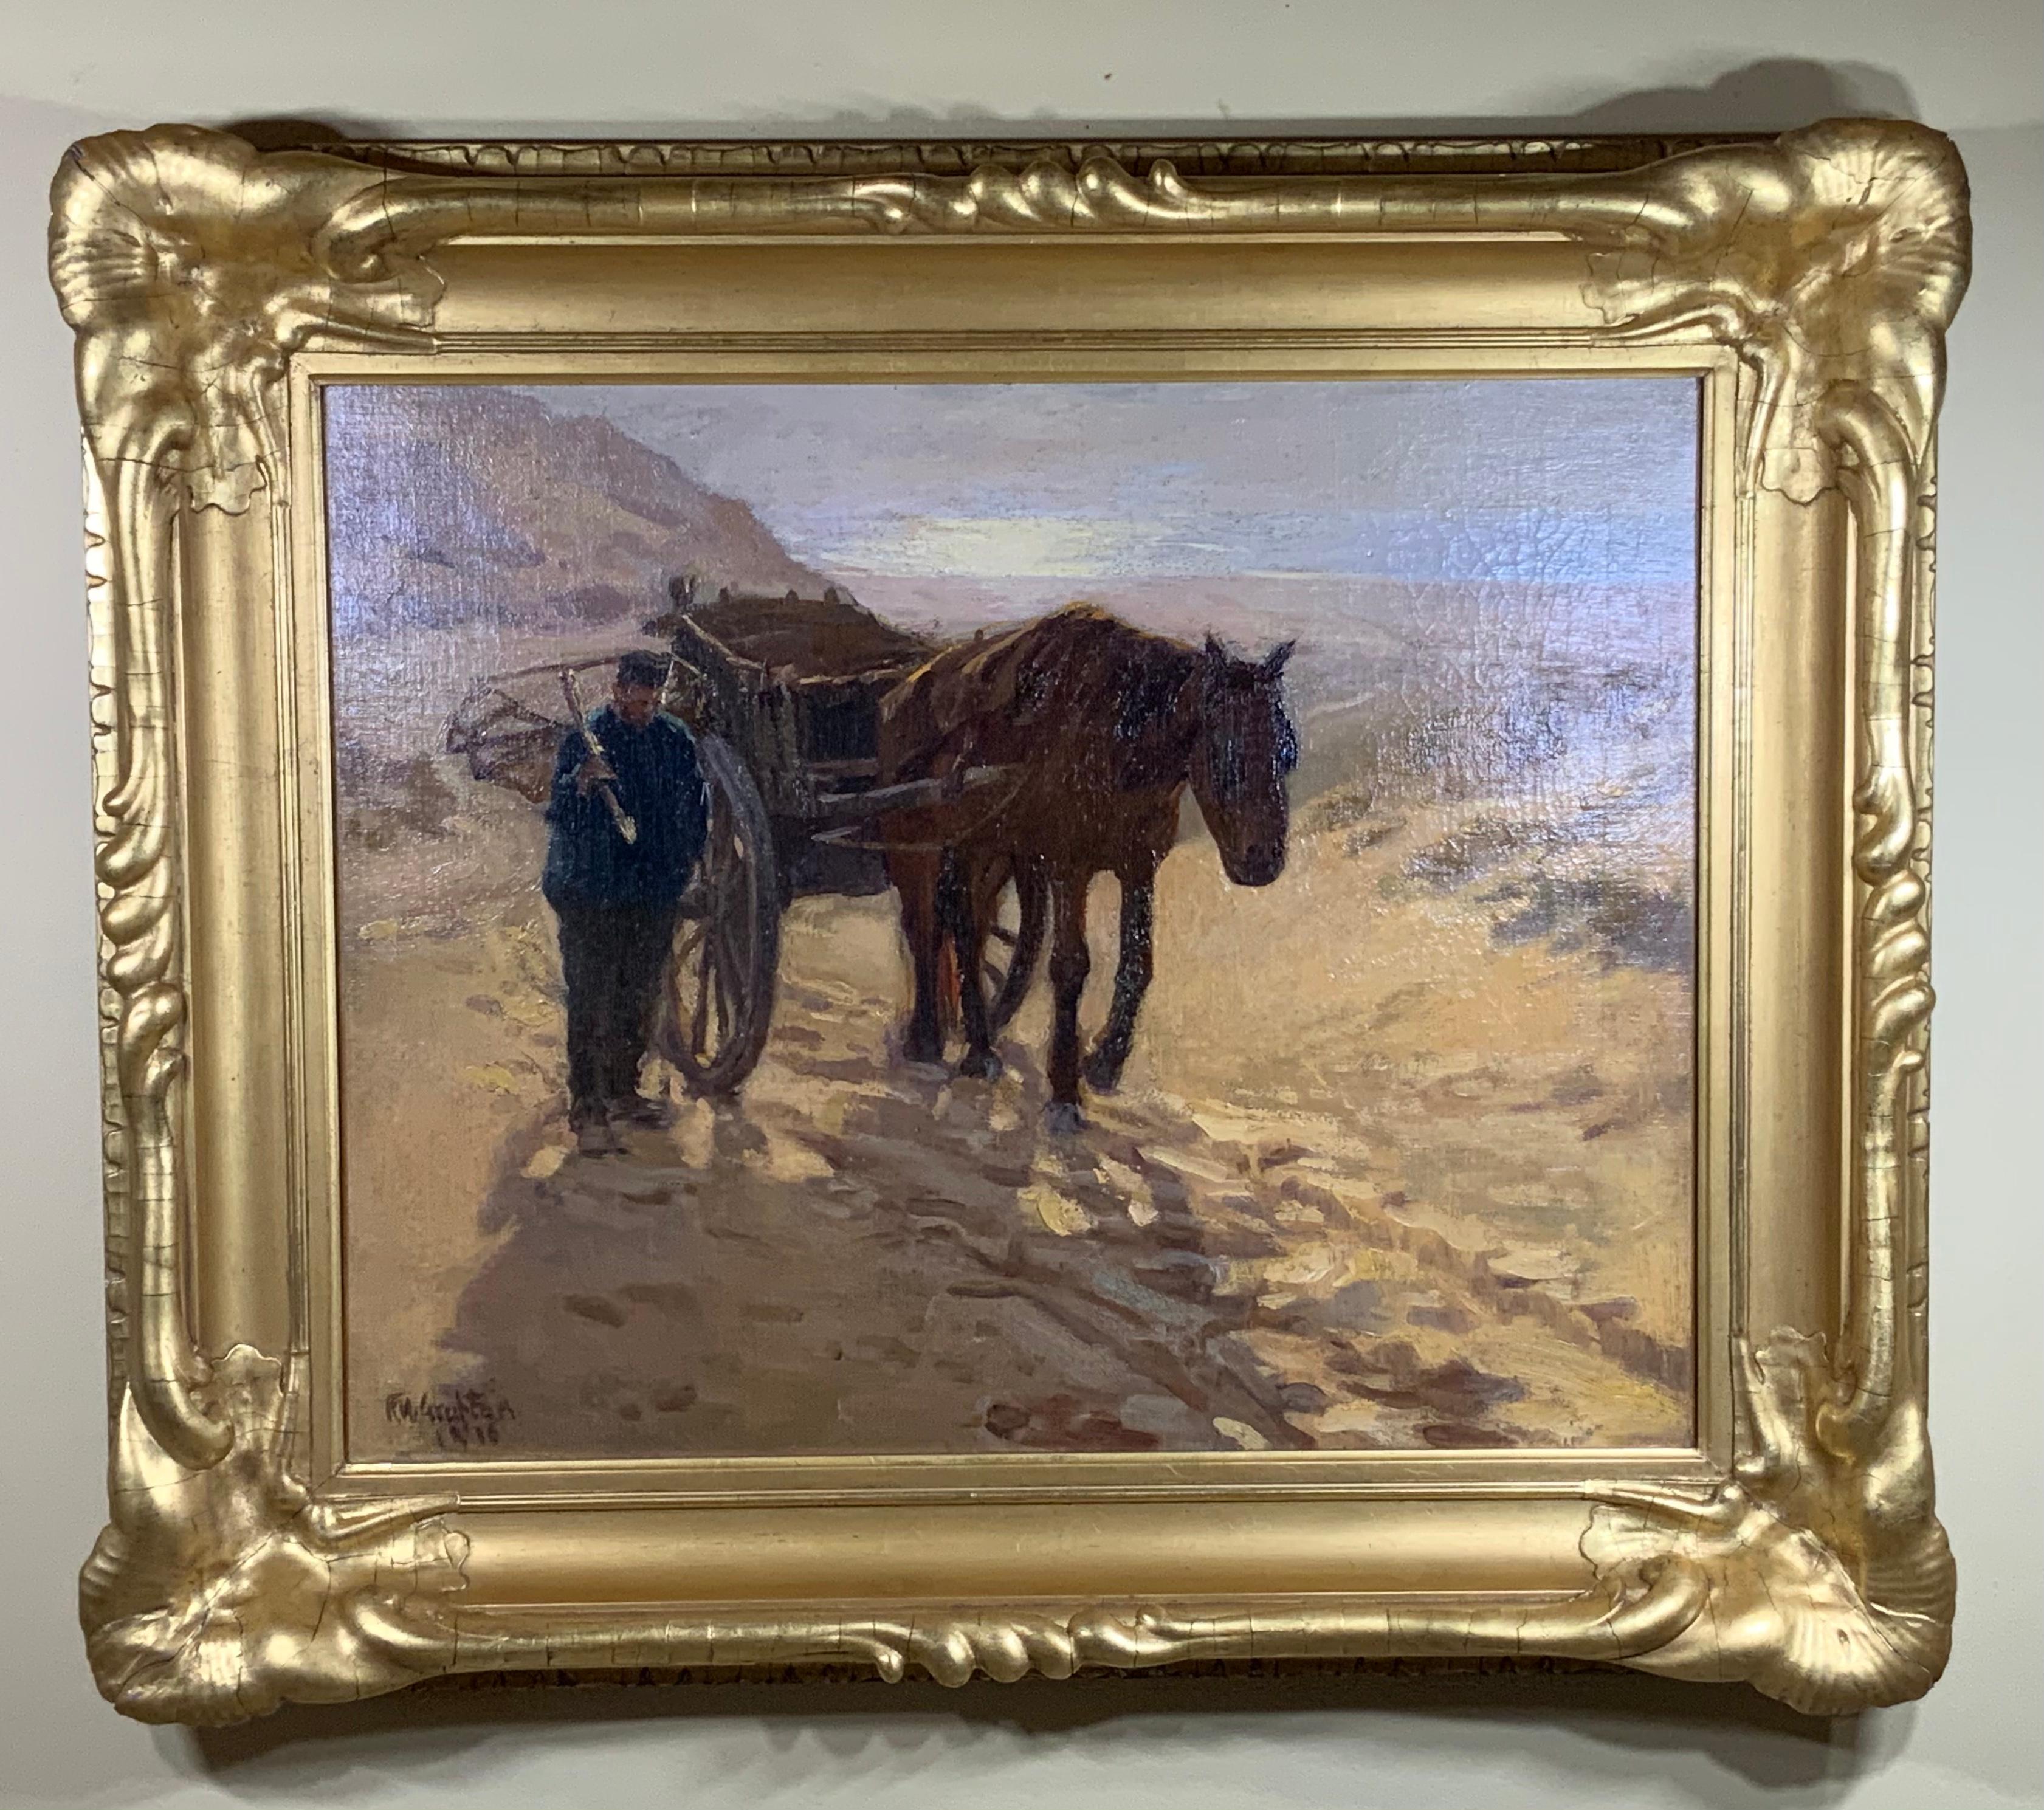 Without frame 25.5 x 20
Exceptional oil painting on canvas bye Robert Wadsworth Grafton (American, 1876-1936).
Great looking painting by distinguish American artist. Great investment for Art connoisseurs or collector of American.
The beautiful